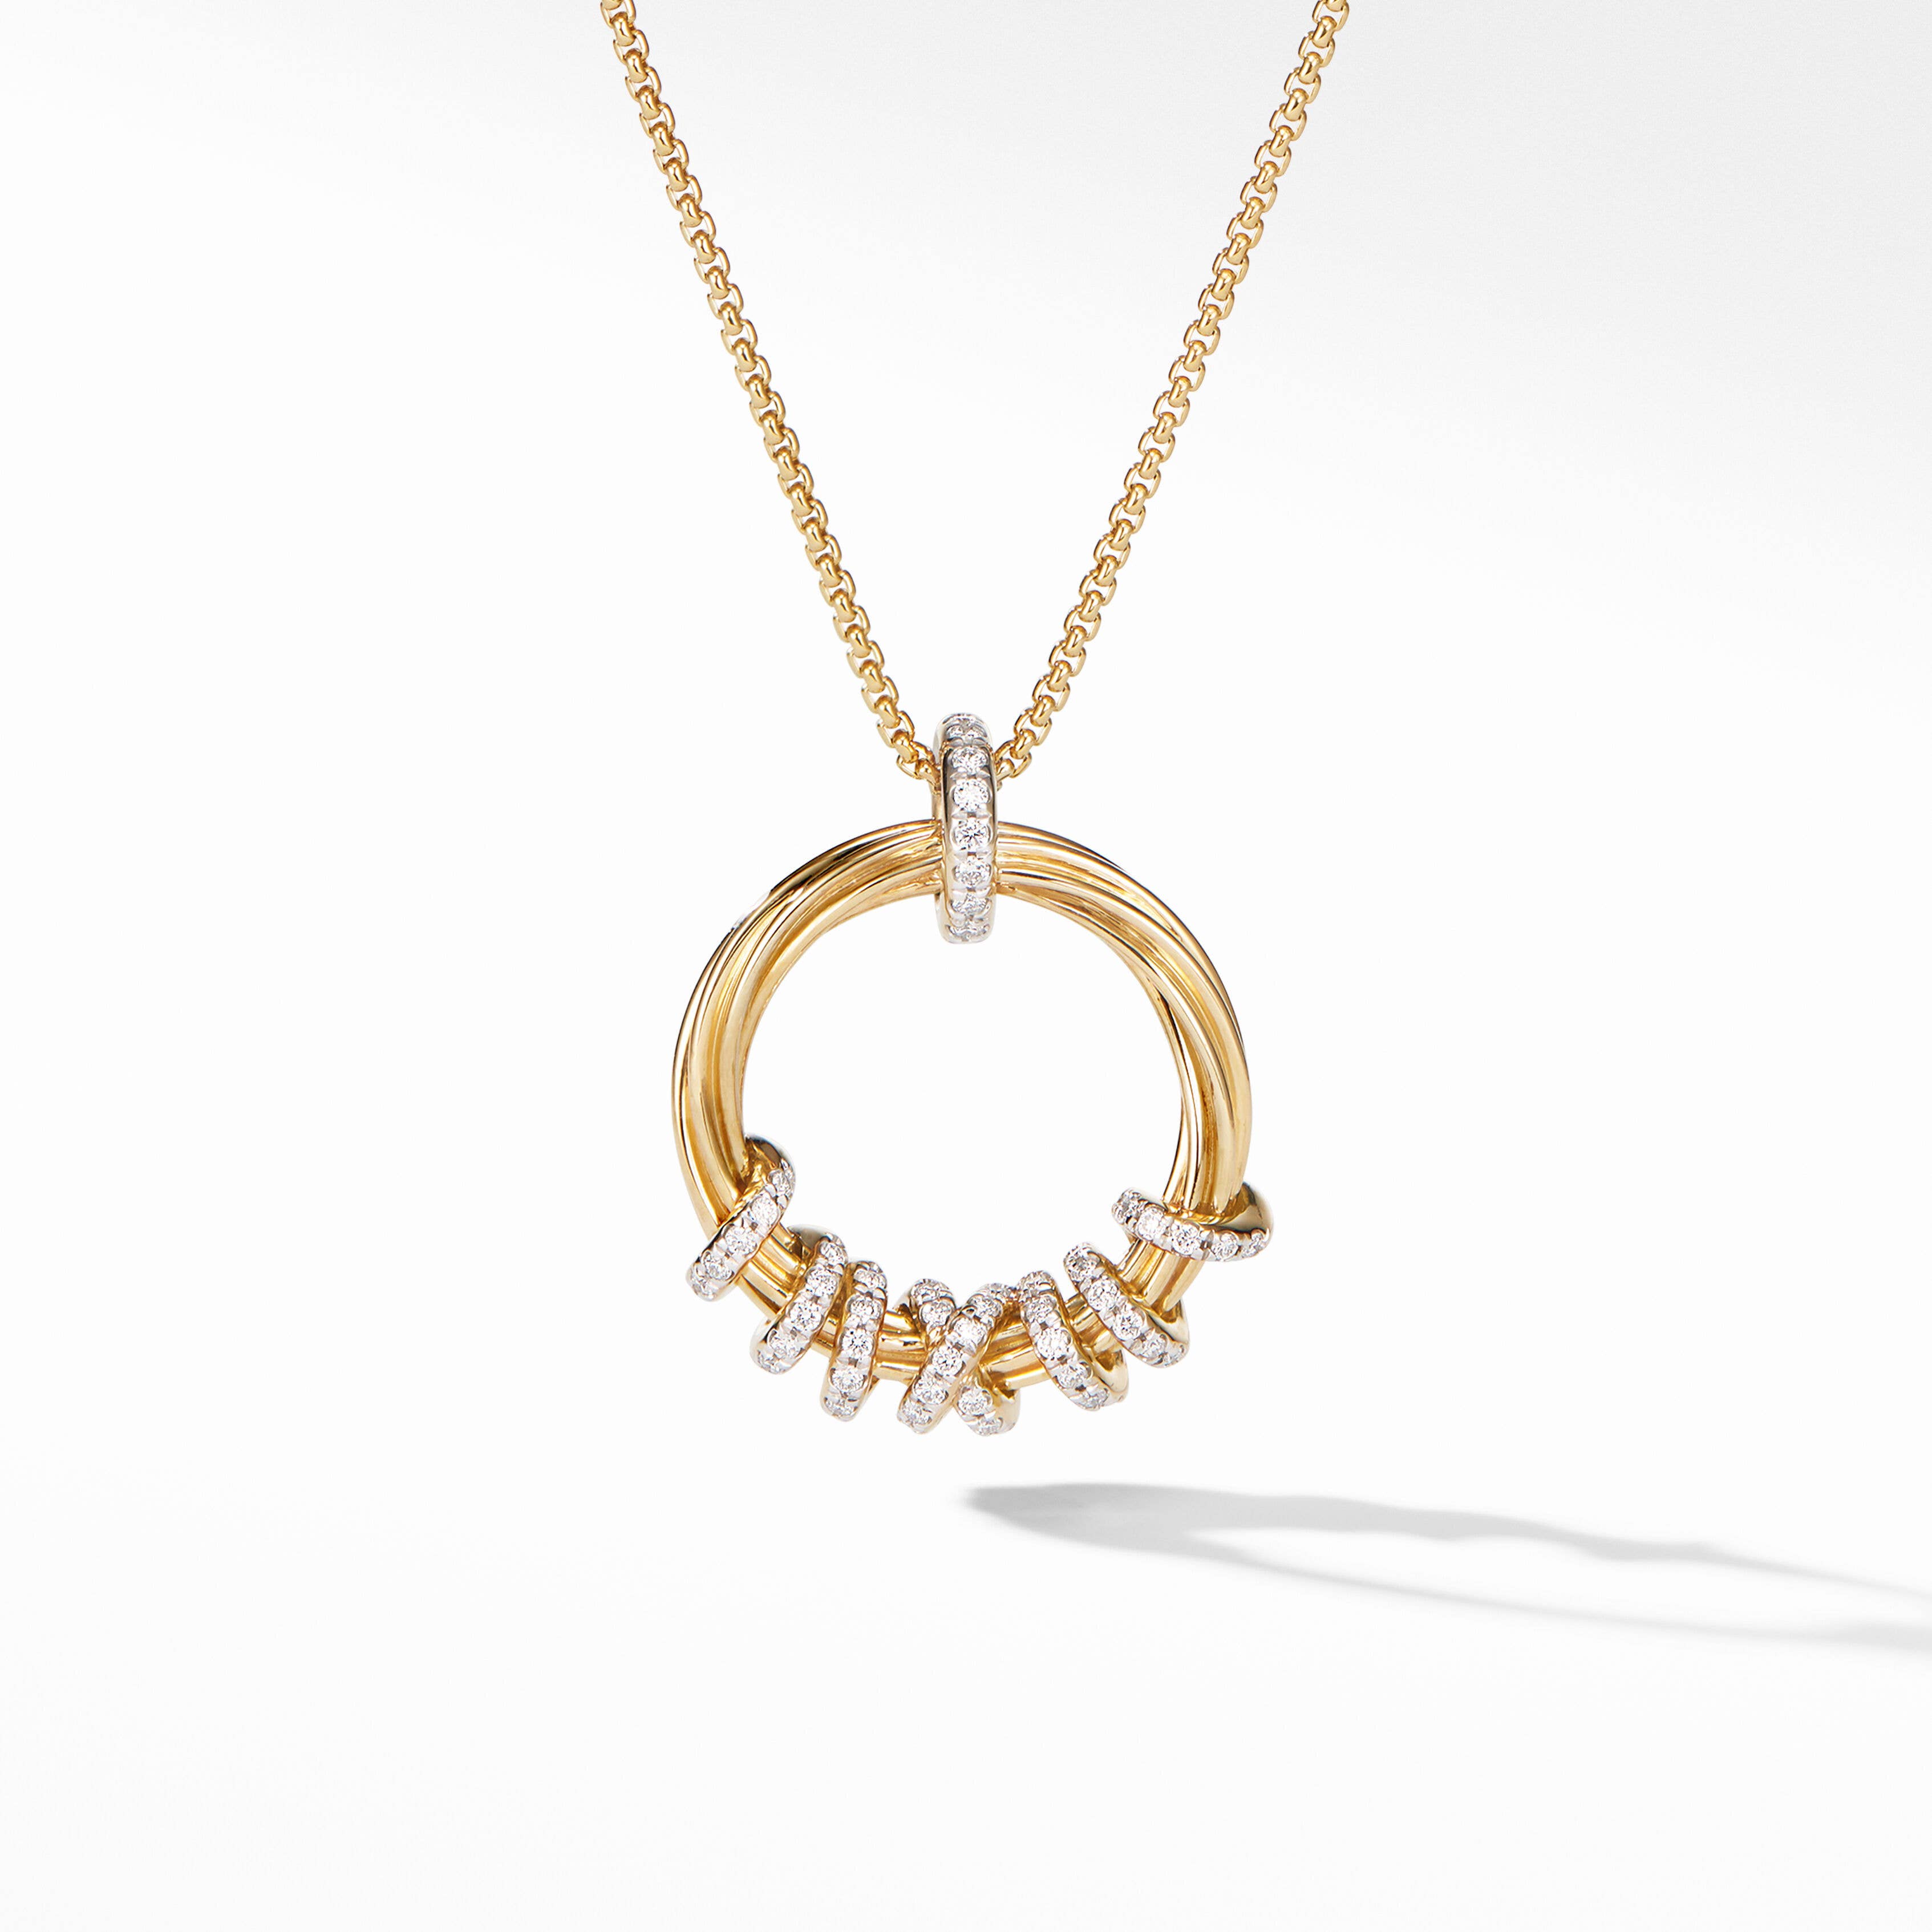 Helena Round Pendant Necklace in 18K Yellow Gold with Pavé Diamonds